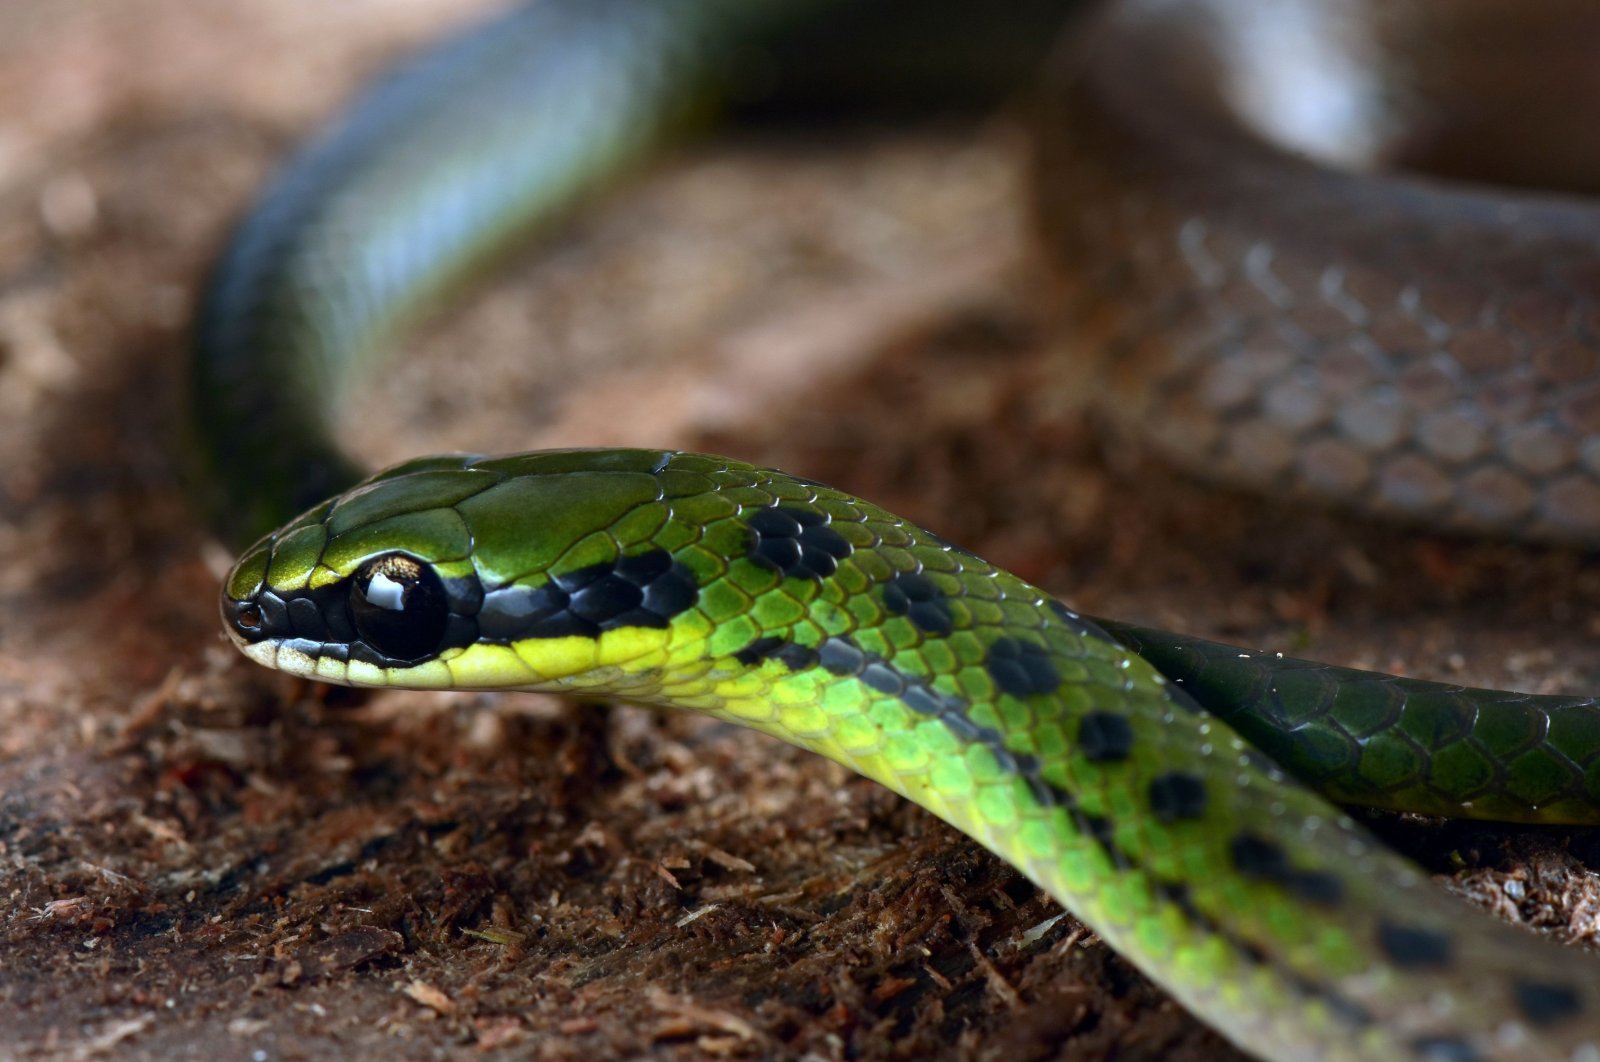 A handout picture released by Conservation International shows the so-called Bolivian flag snake recently found in the forests of Bolivia Zongo Valley, north of La Paz, Bolivia on Dec. 13, 2020. (AFP Photo)